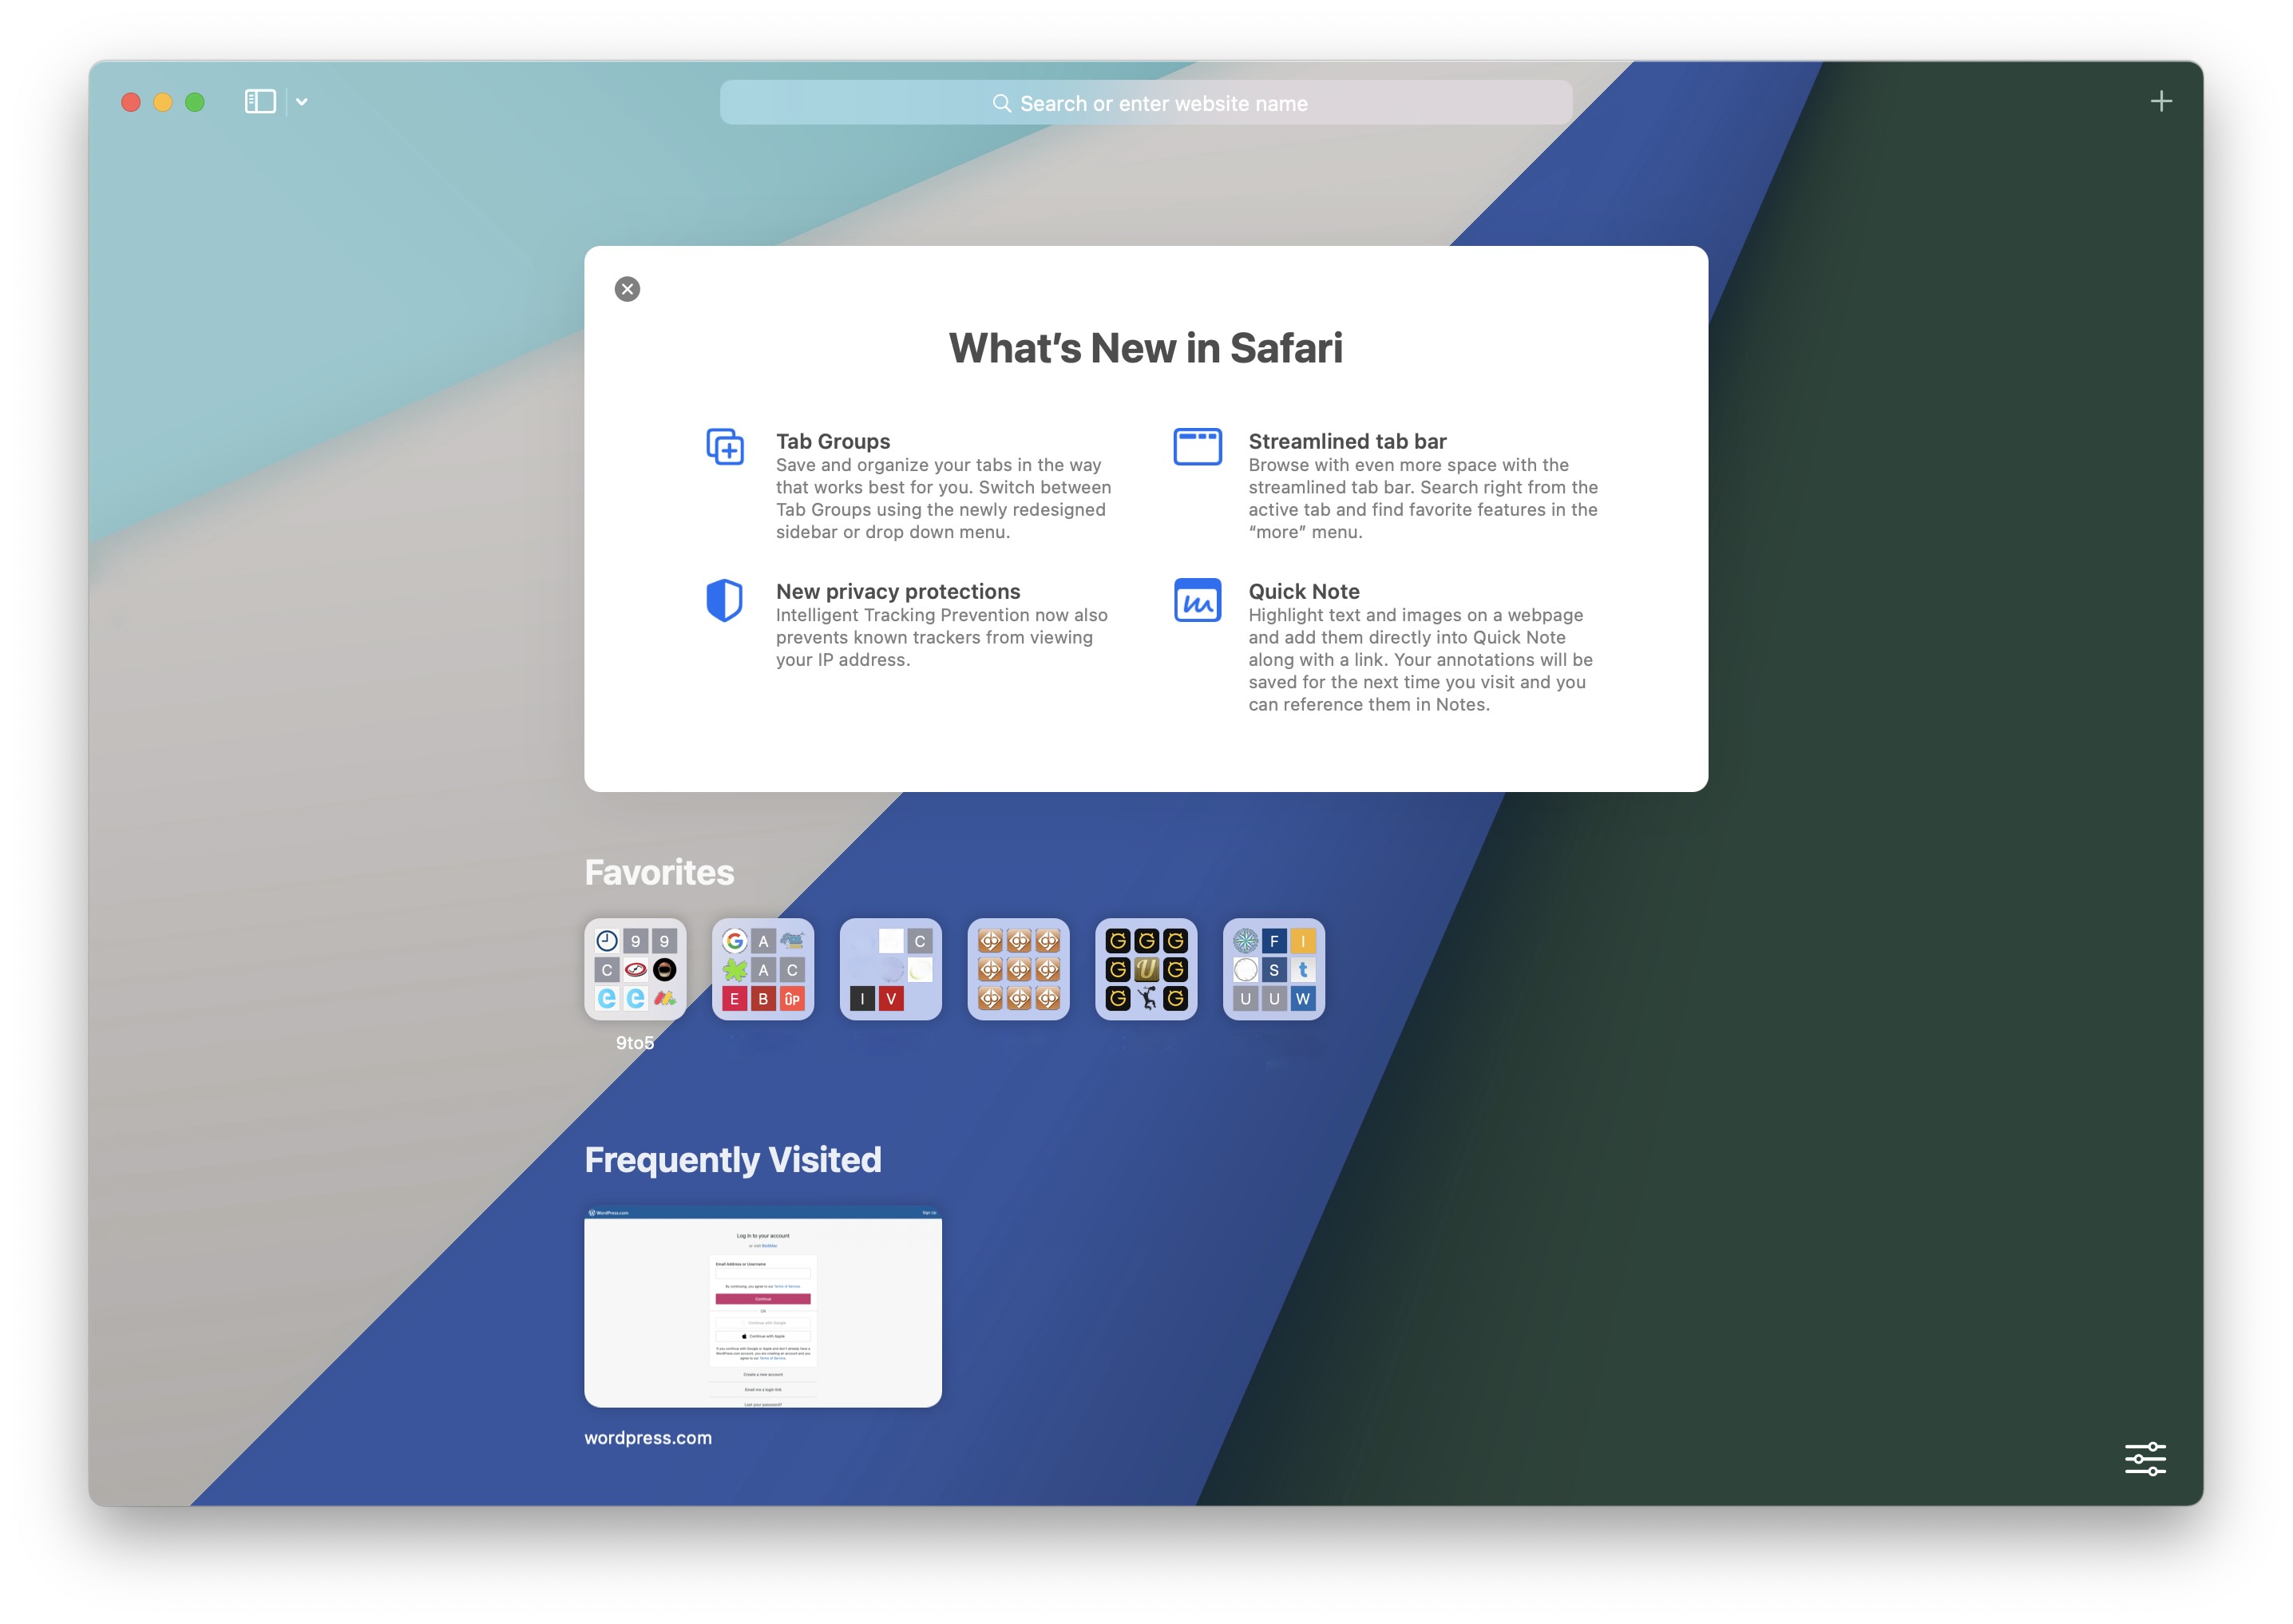 Here’s what’s new with the redesigned Safari in macOS Monterey and how it works